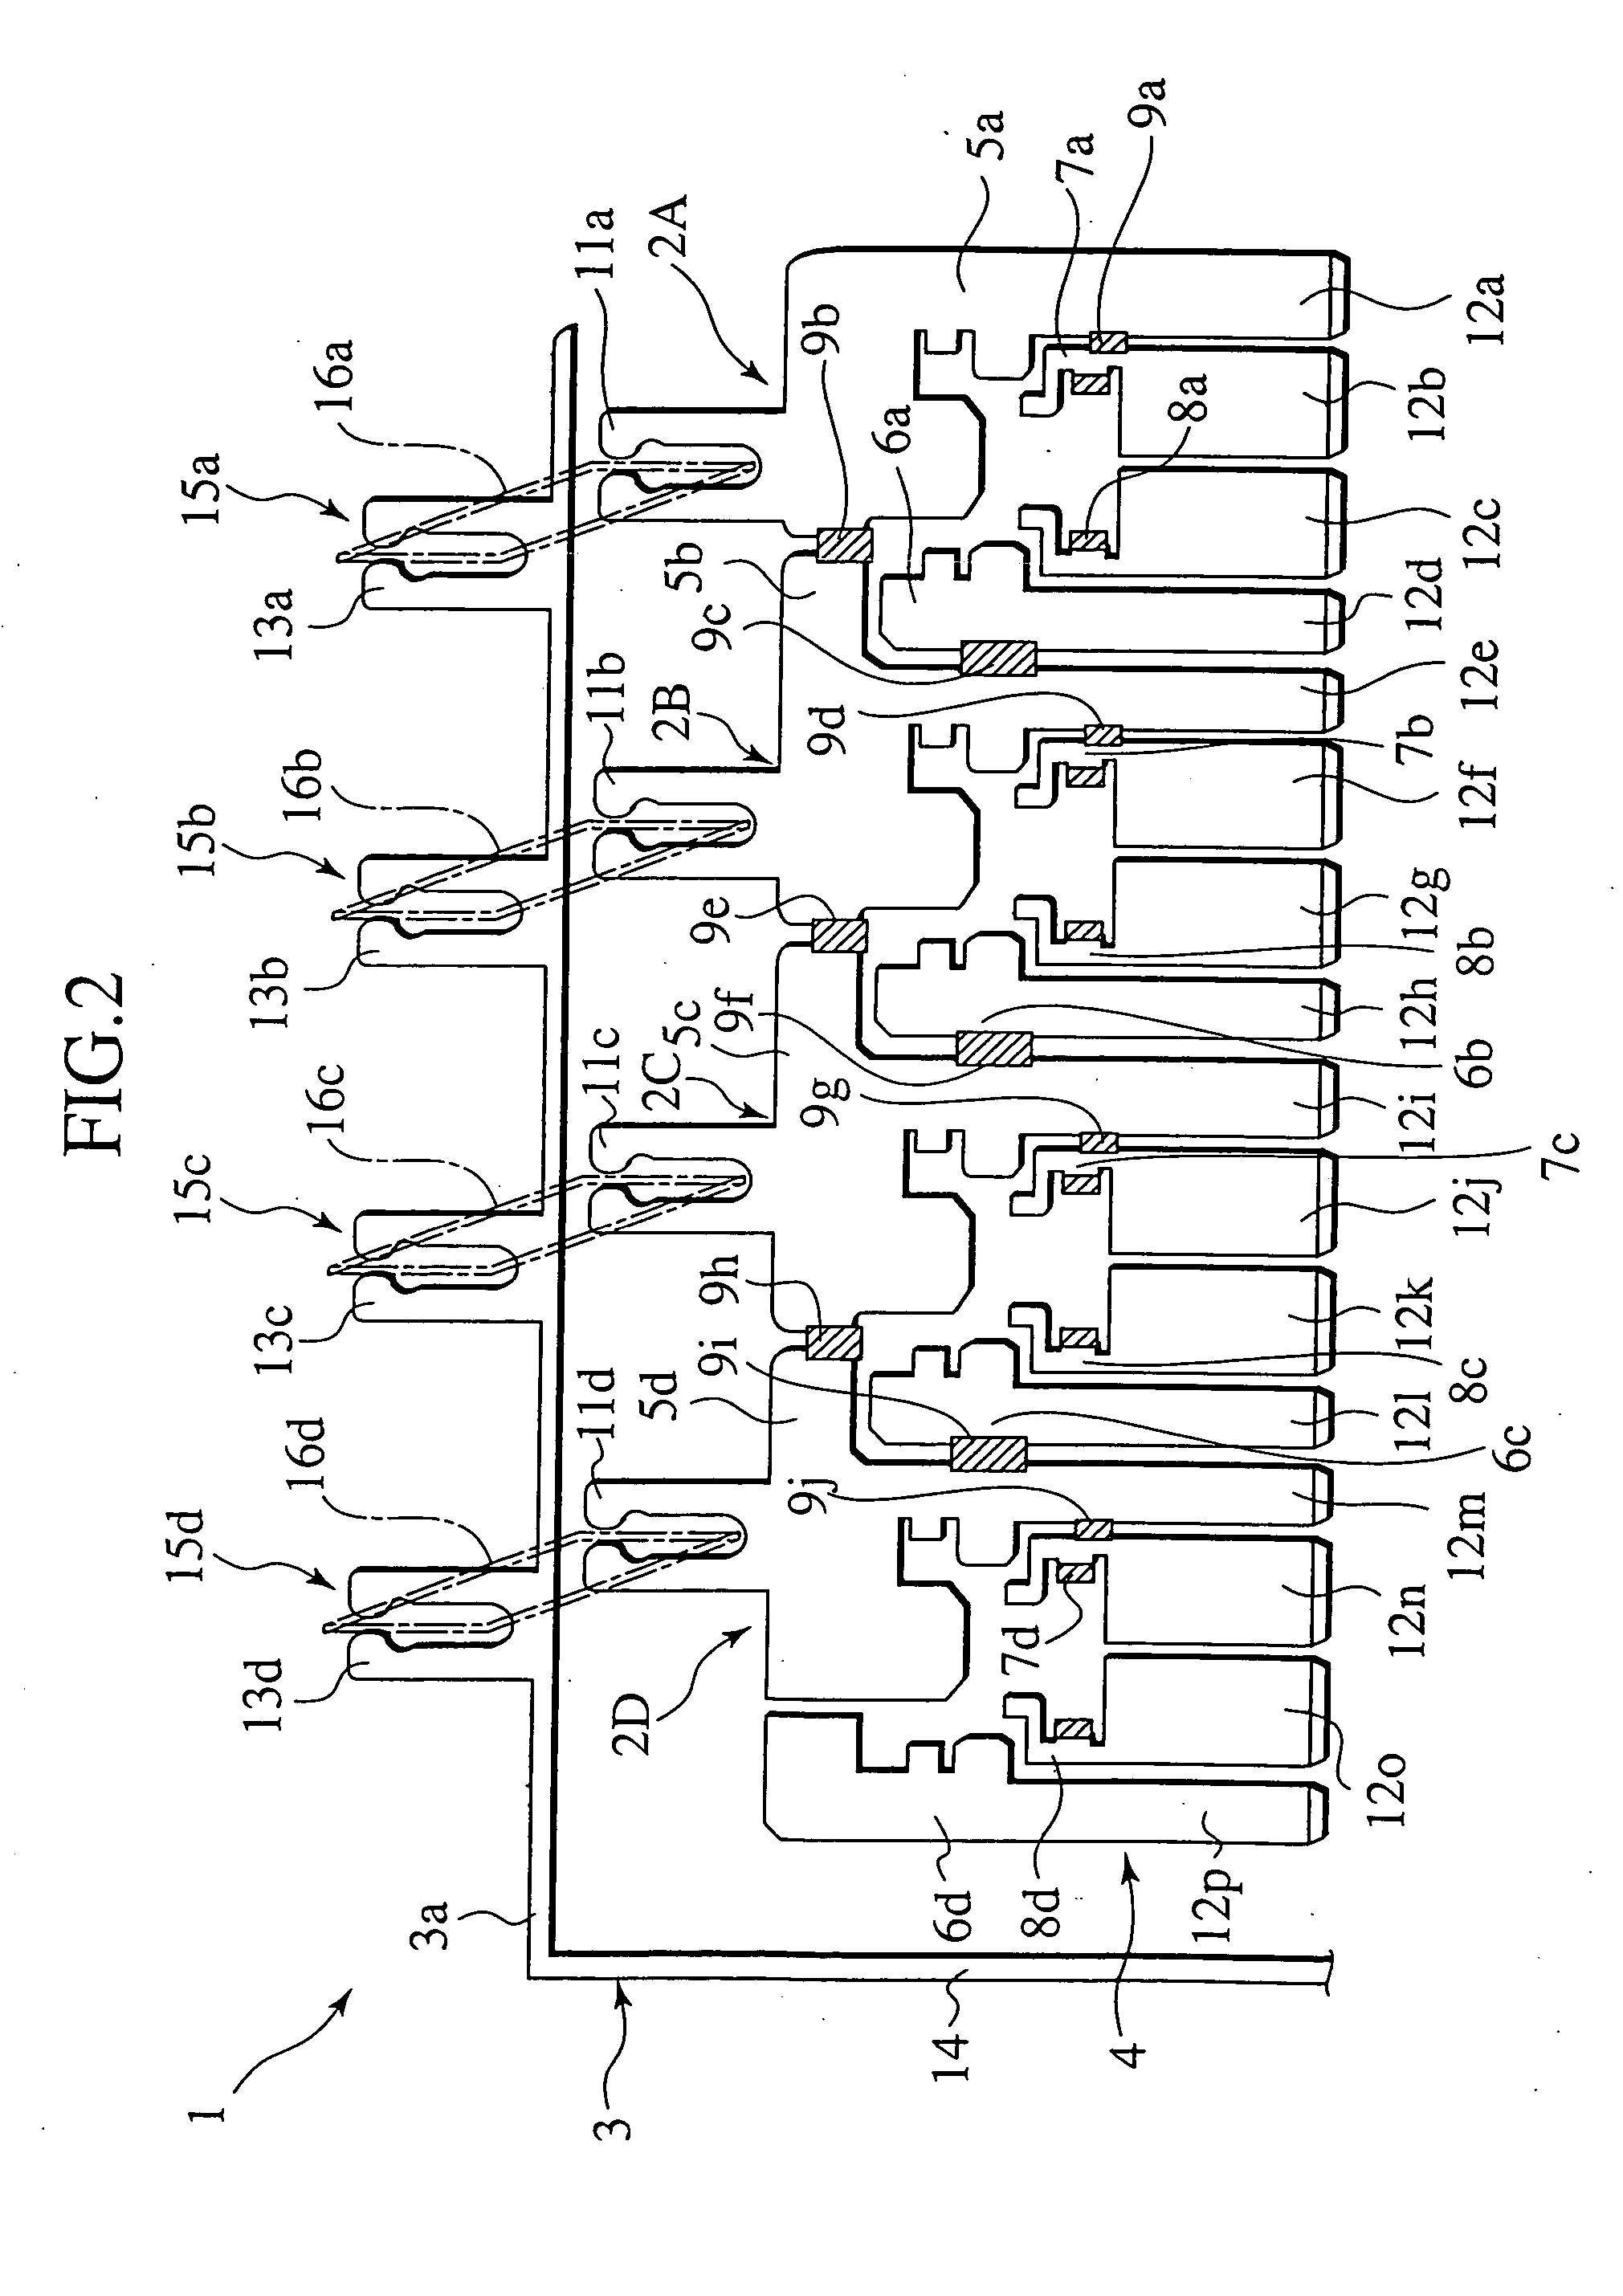 Relay, relay unit and electrical junction box